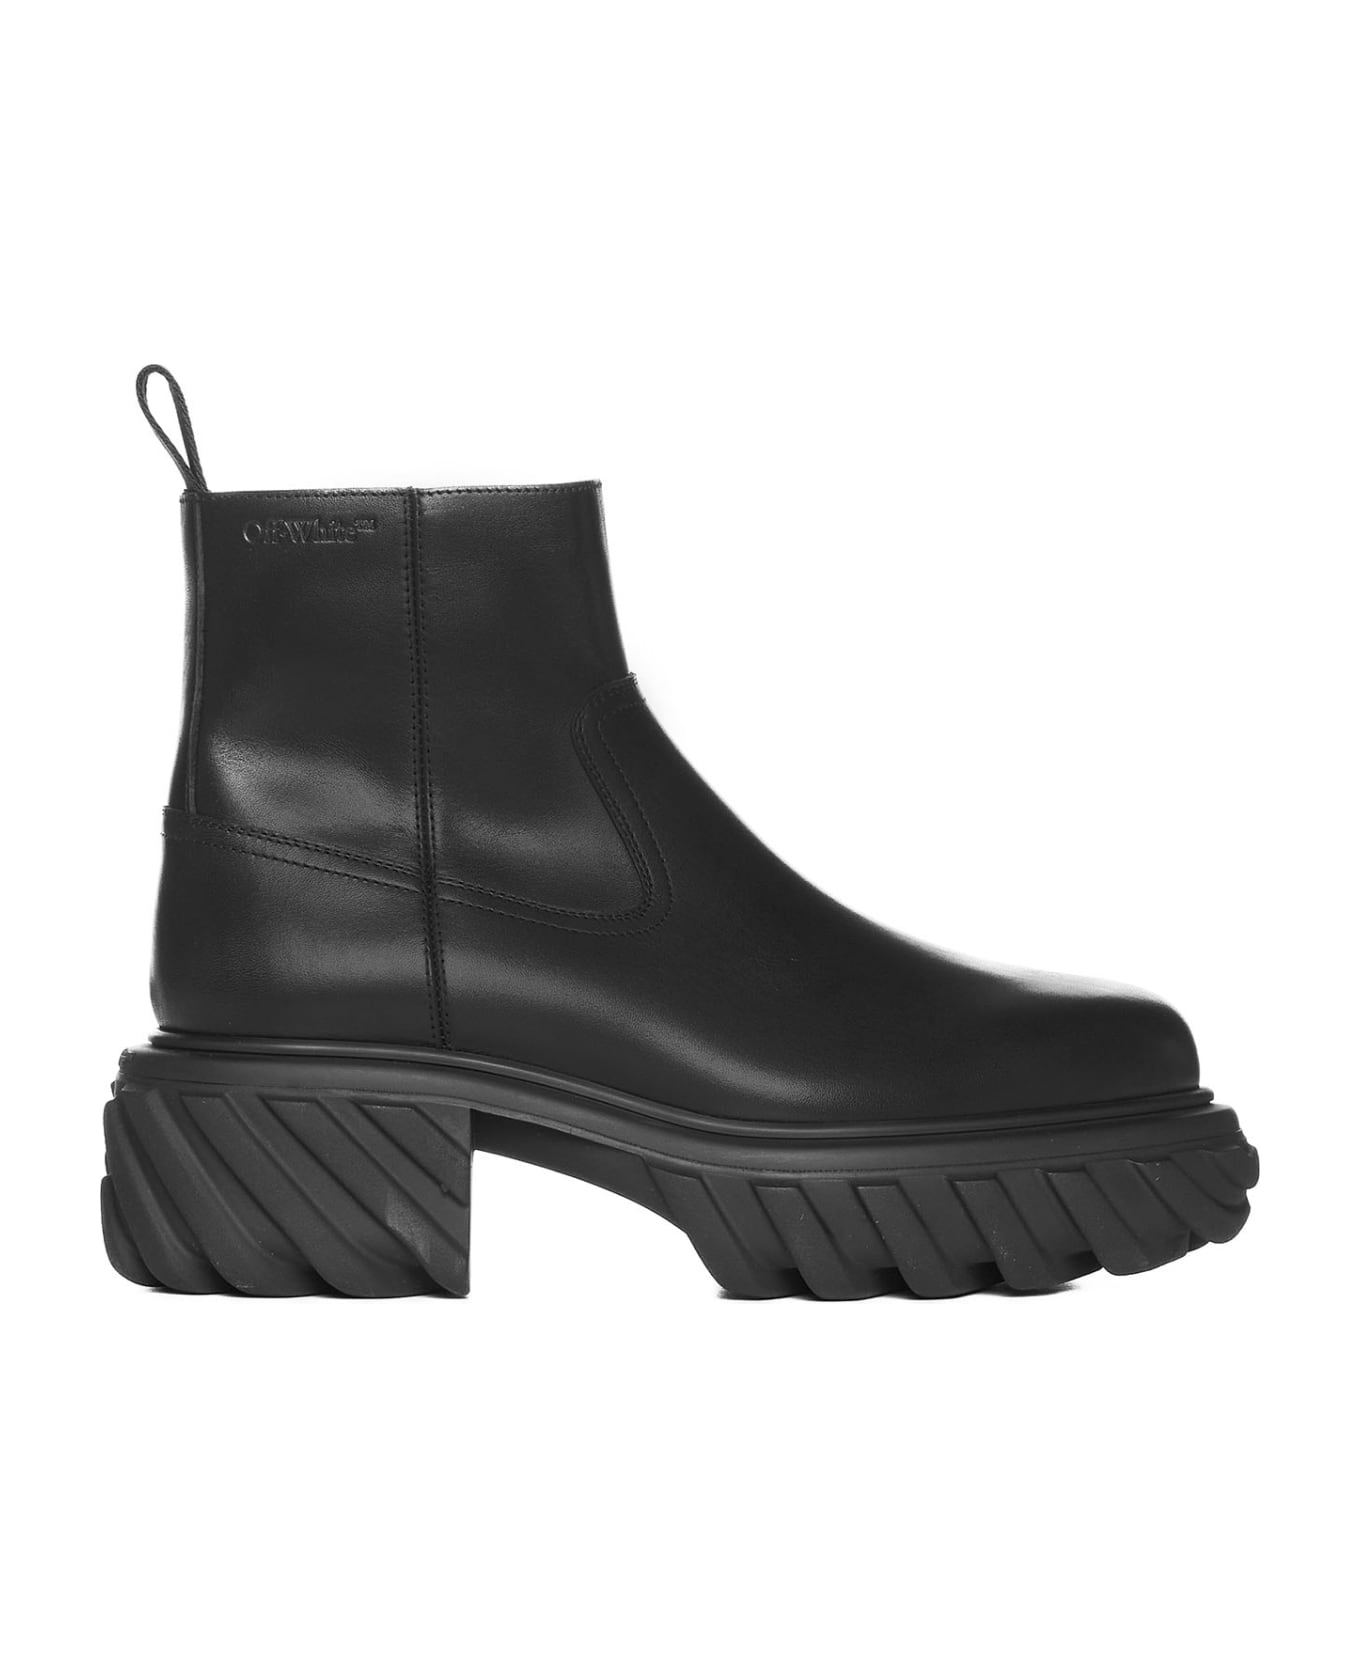 Off-White Tractor Motor Ankle Boots - Black